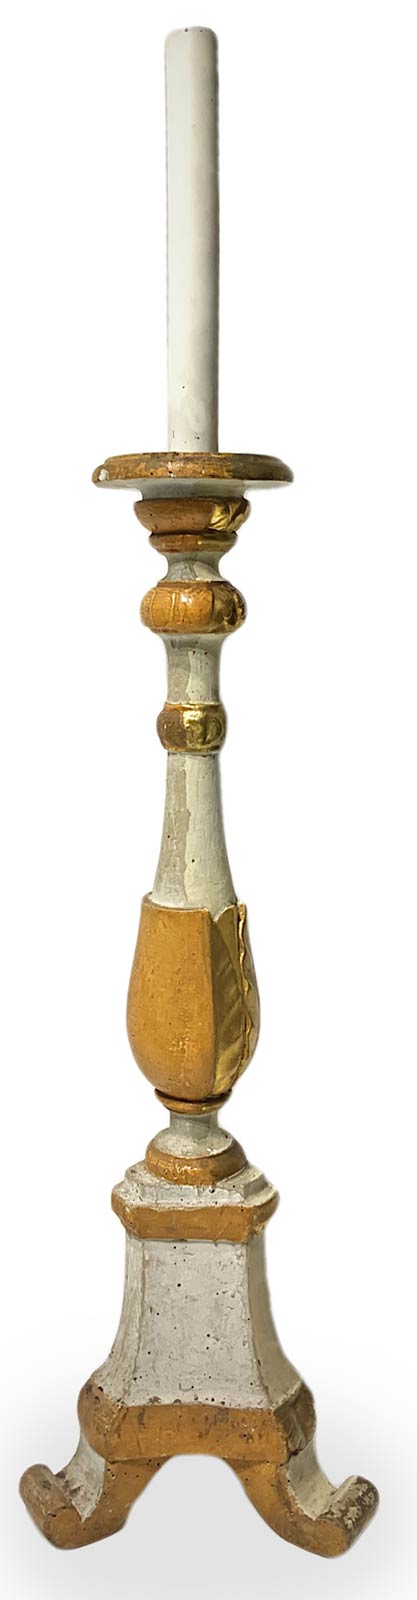 Candlestick lacquered and gilded, 19th century. H 88 cm - Image 2 of 3